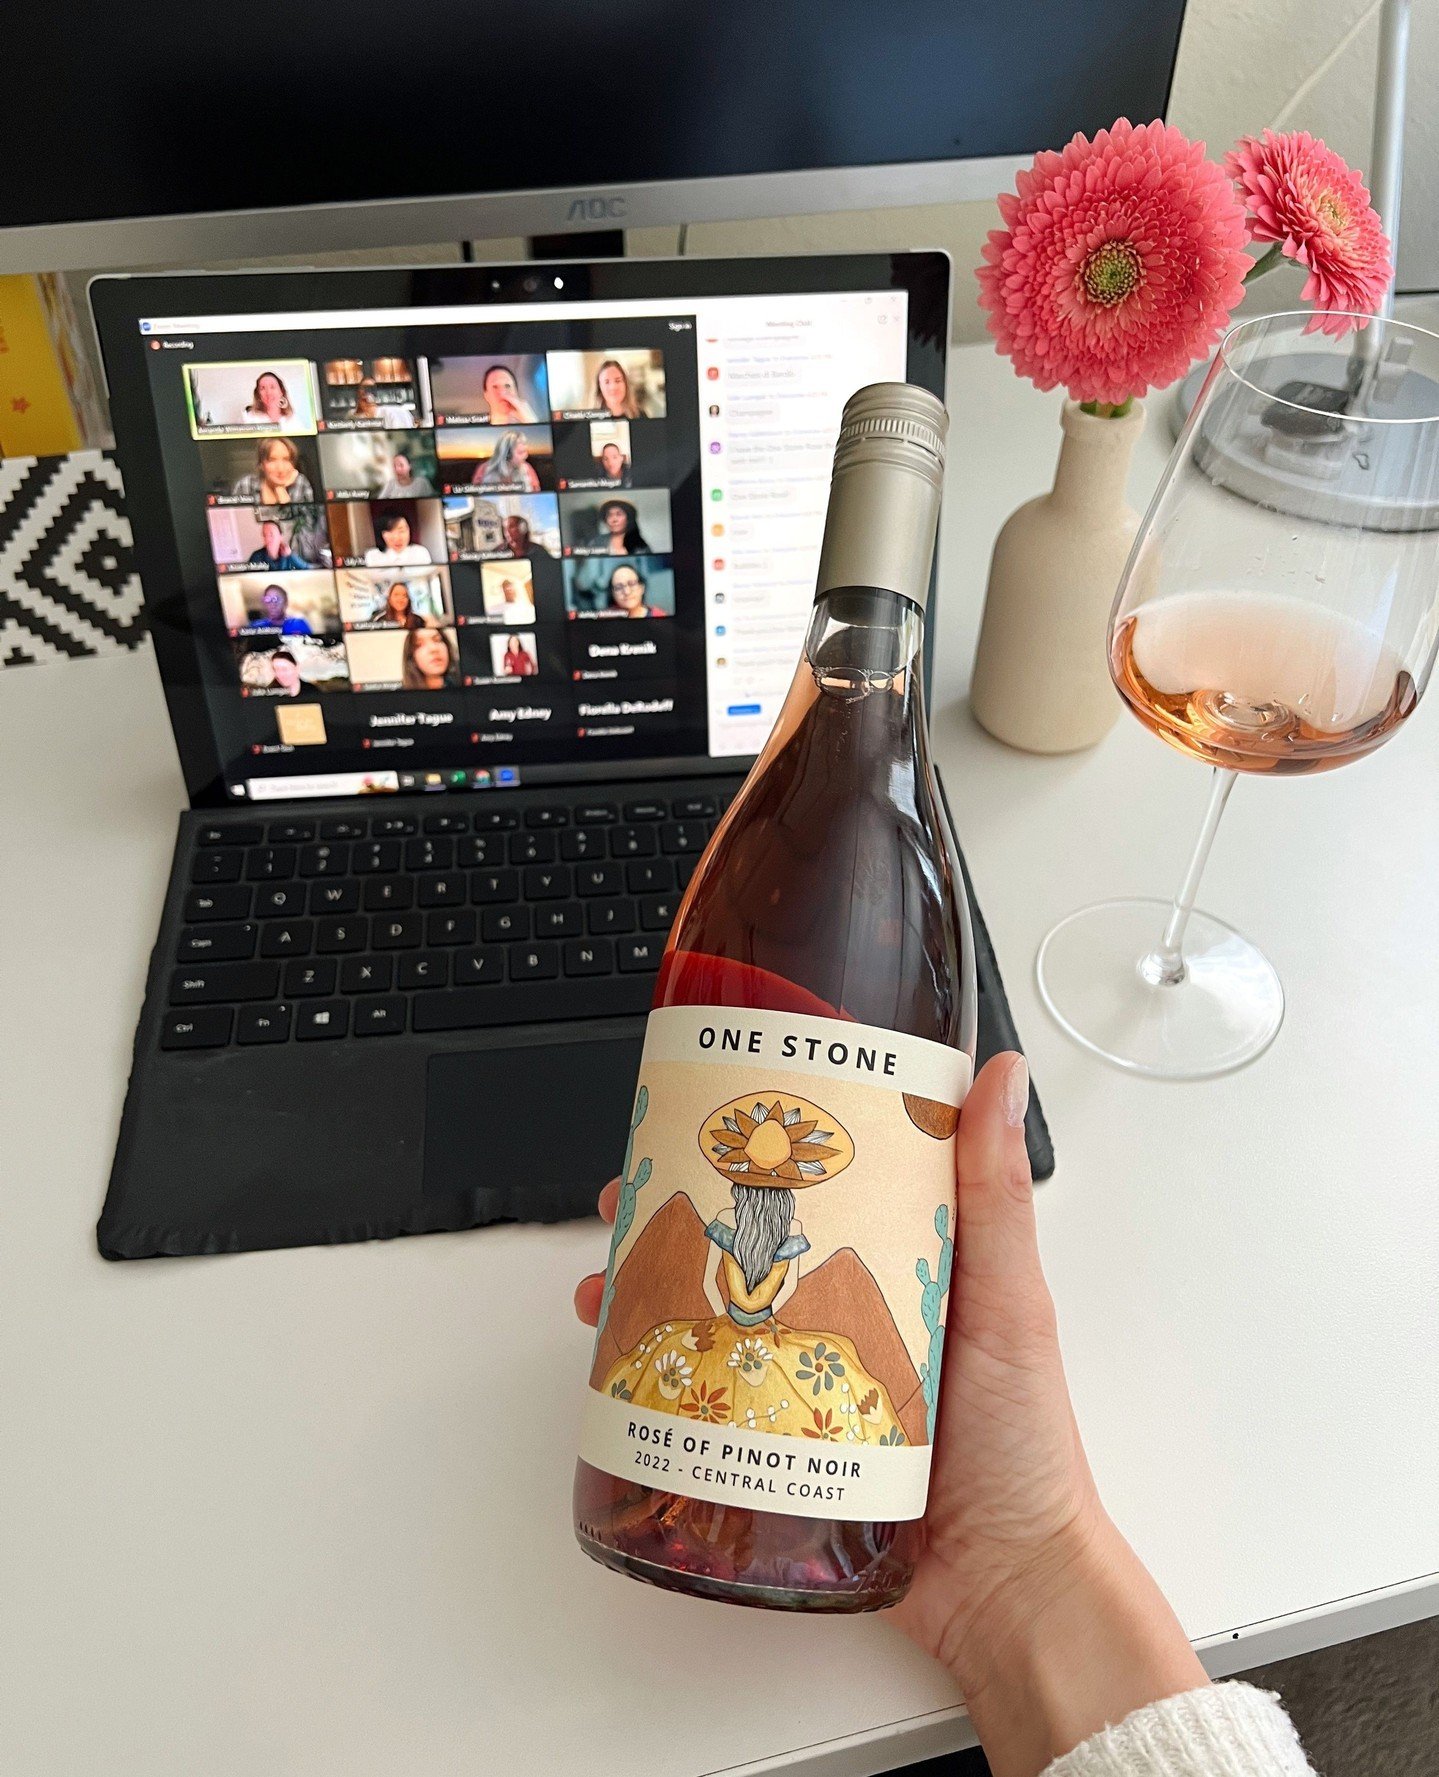 We hear you! We are excited to announce a new way for you to stay connected with other members of our community:⁠
⁠
Join our private group on LinkedIn! ✨⁠
⁠
After our last virtual event where we sipped @onestonecellars Rose together and got to know o